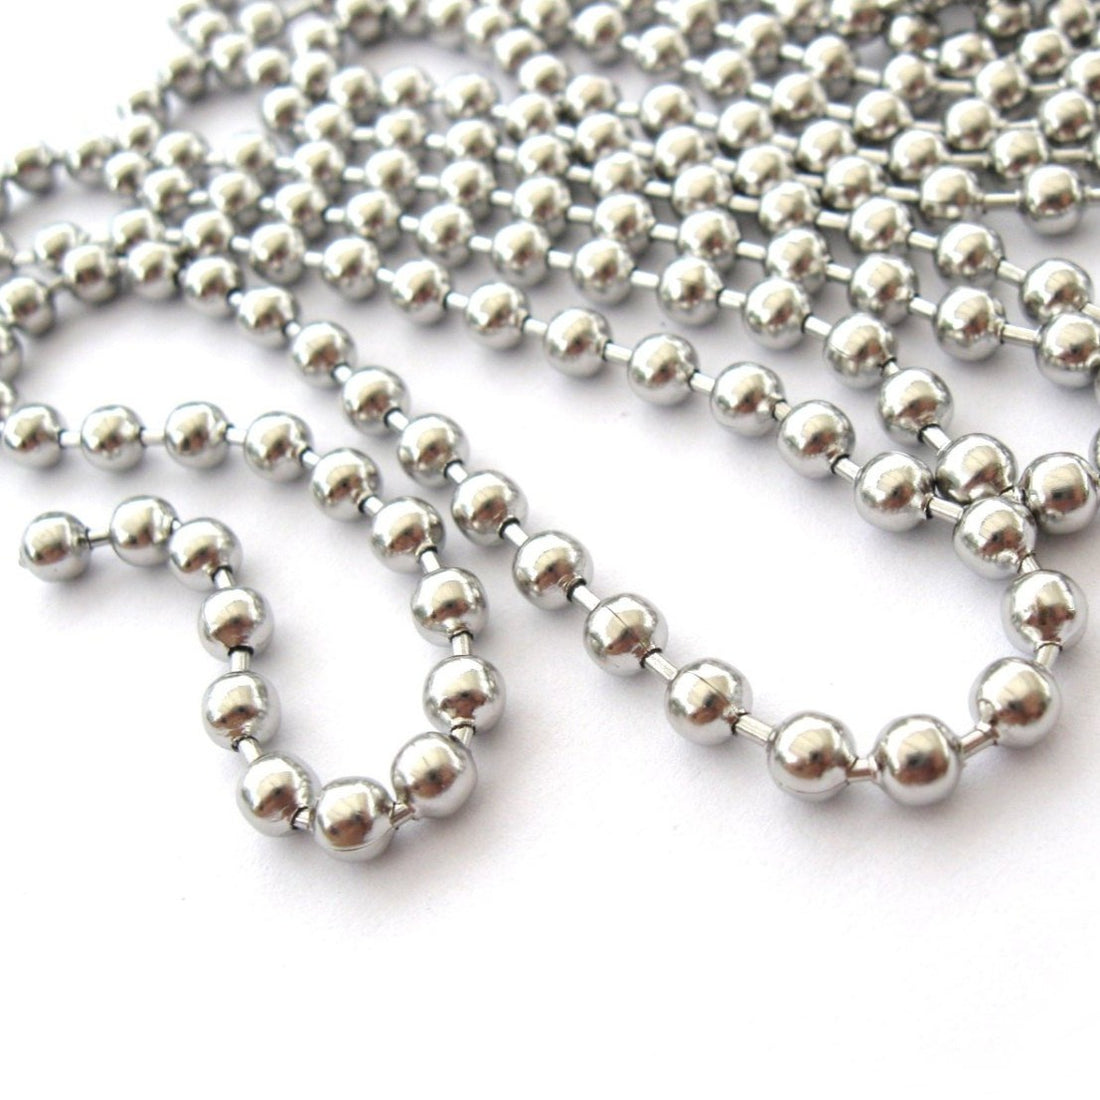 Big Stainless Steel Ball Chain 4mm - 2 meters